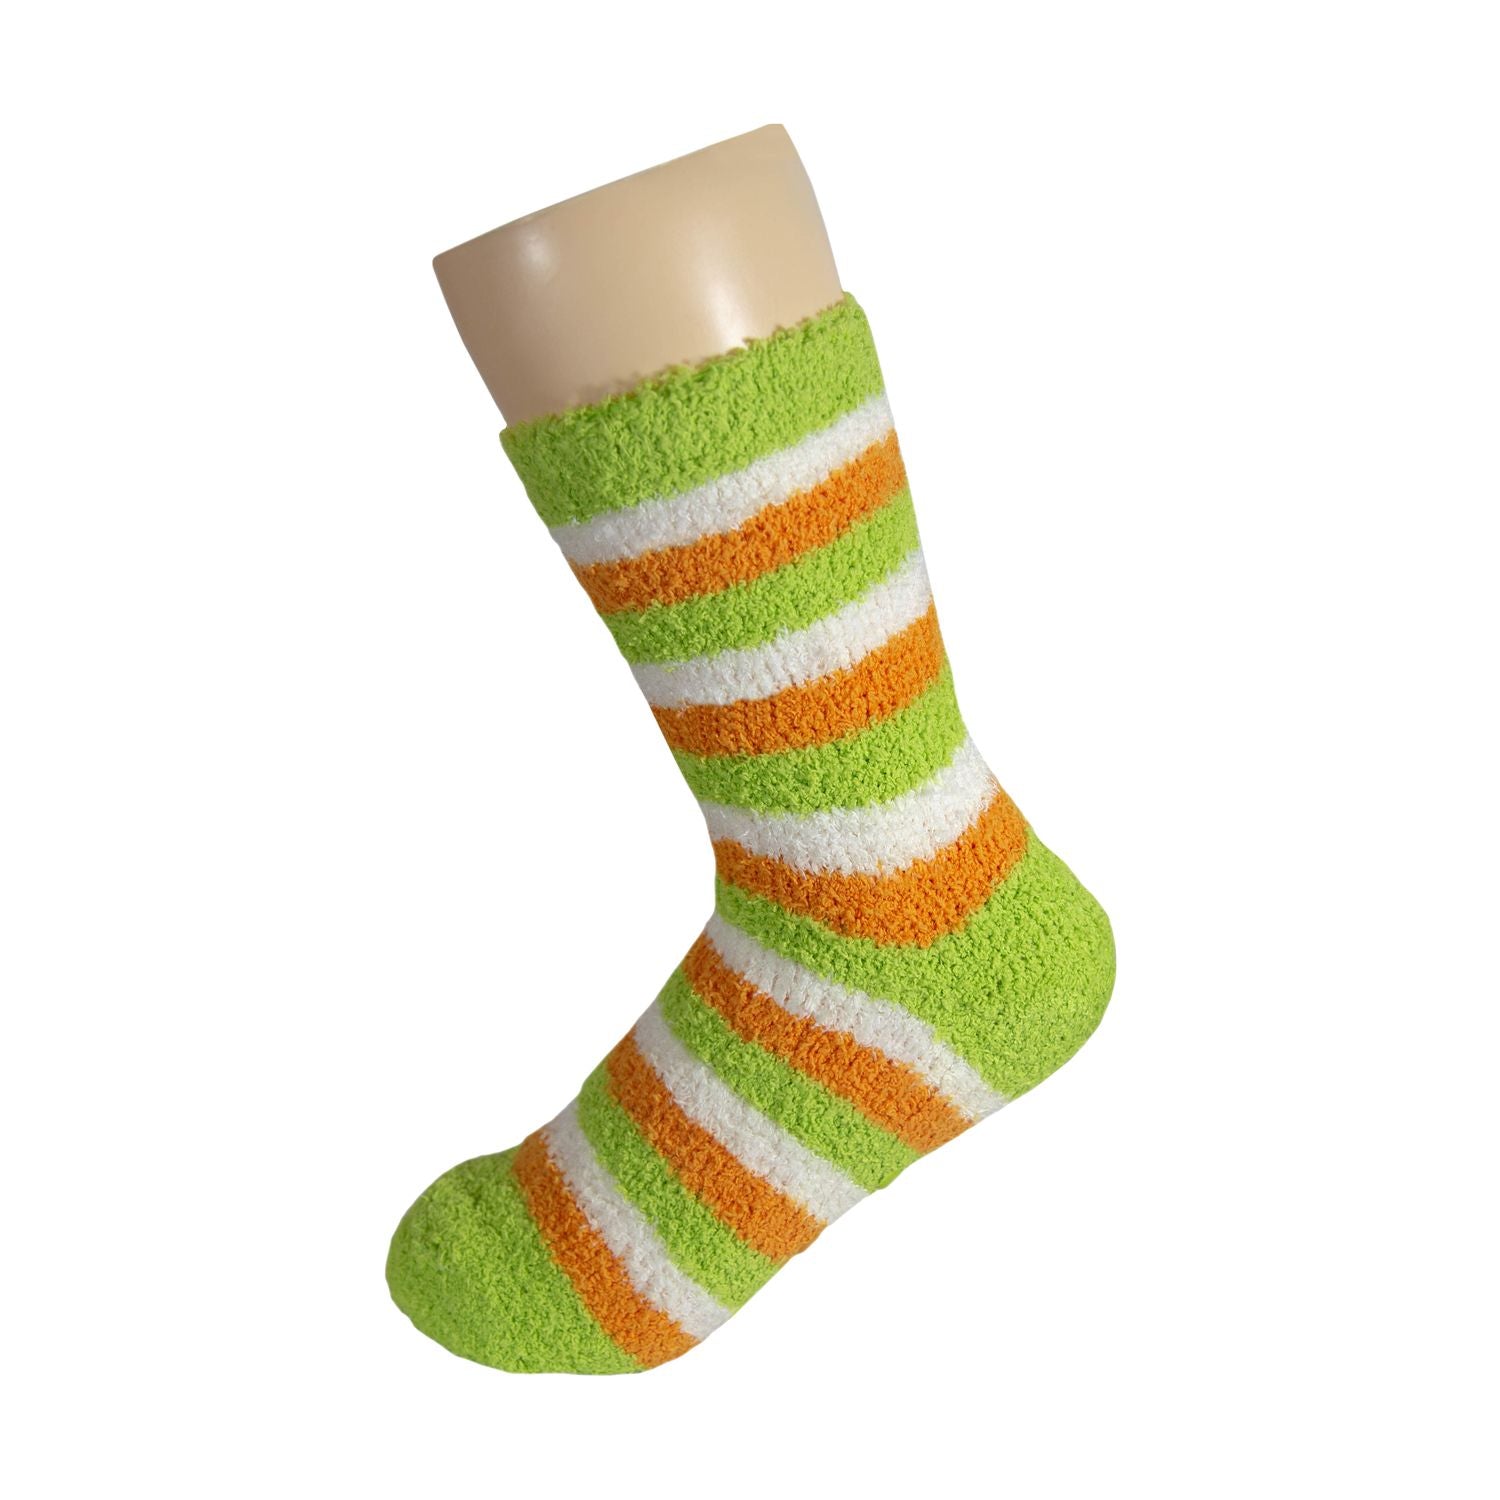 Green White and Orange Striped Anti Skid Fuzzy Socks with Rubber Grips For Women